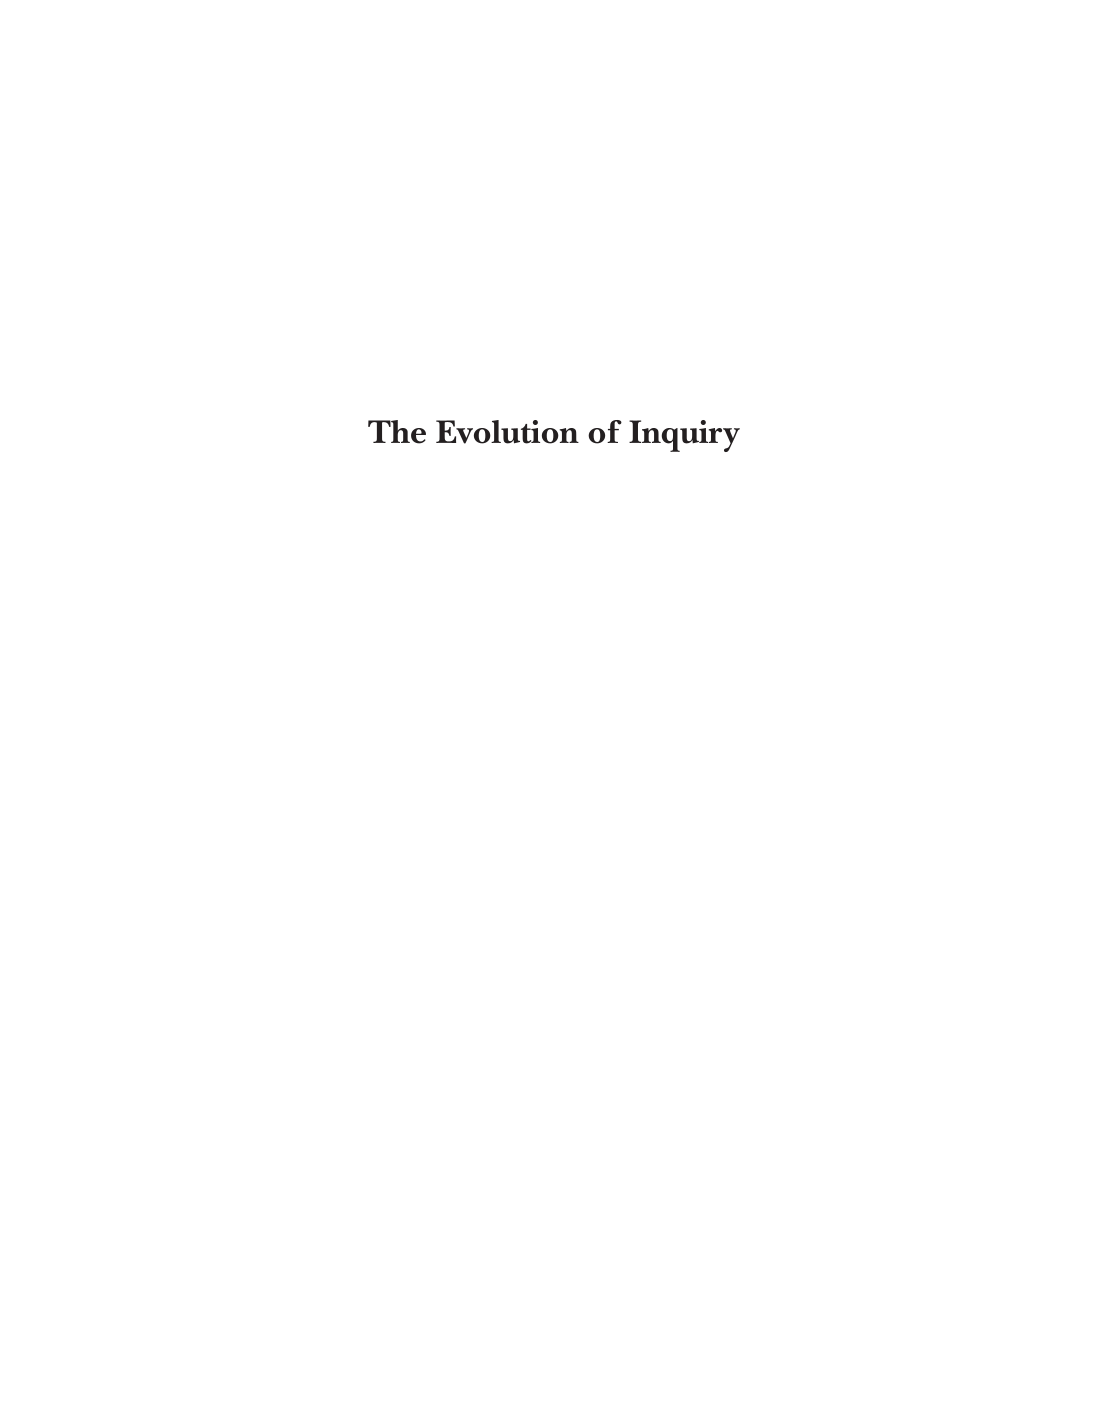 The Evolution of Inquiry: Controlled, Guided, Modeled, and Free page i